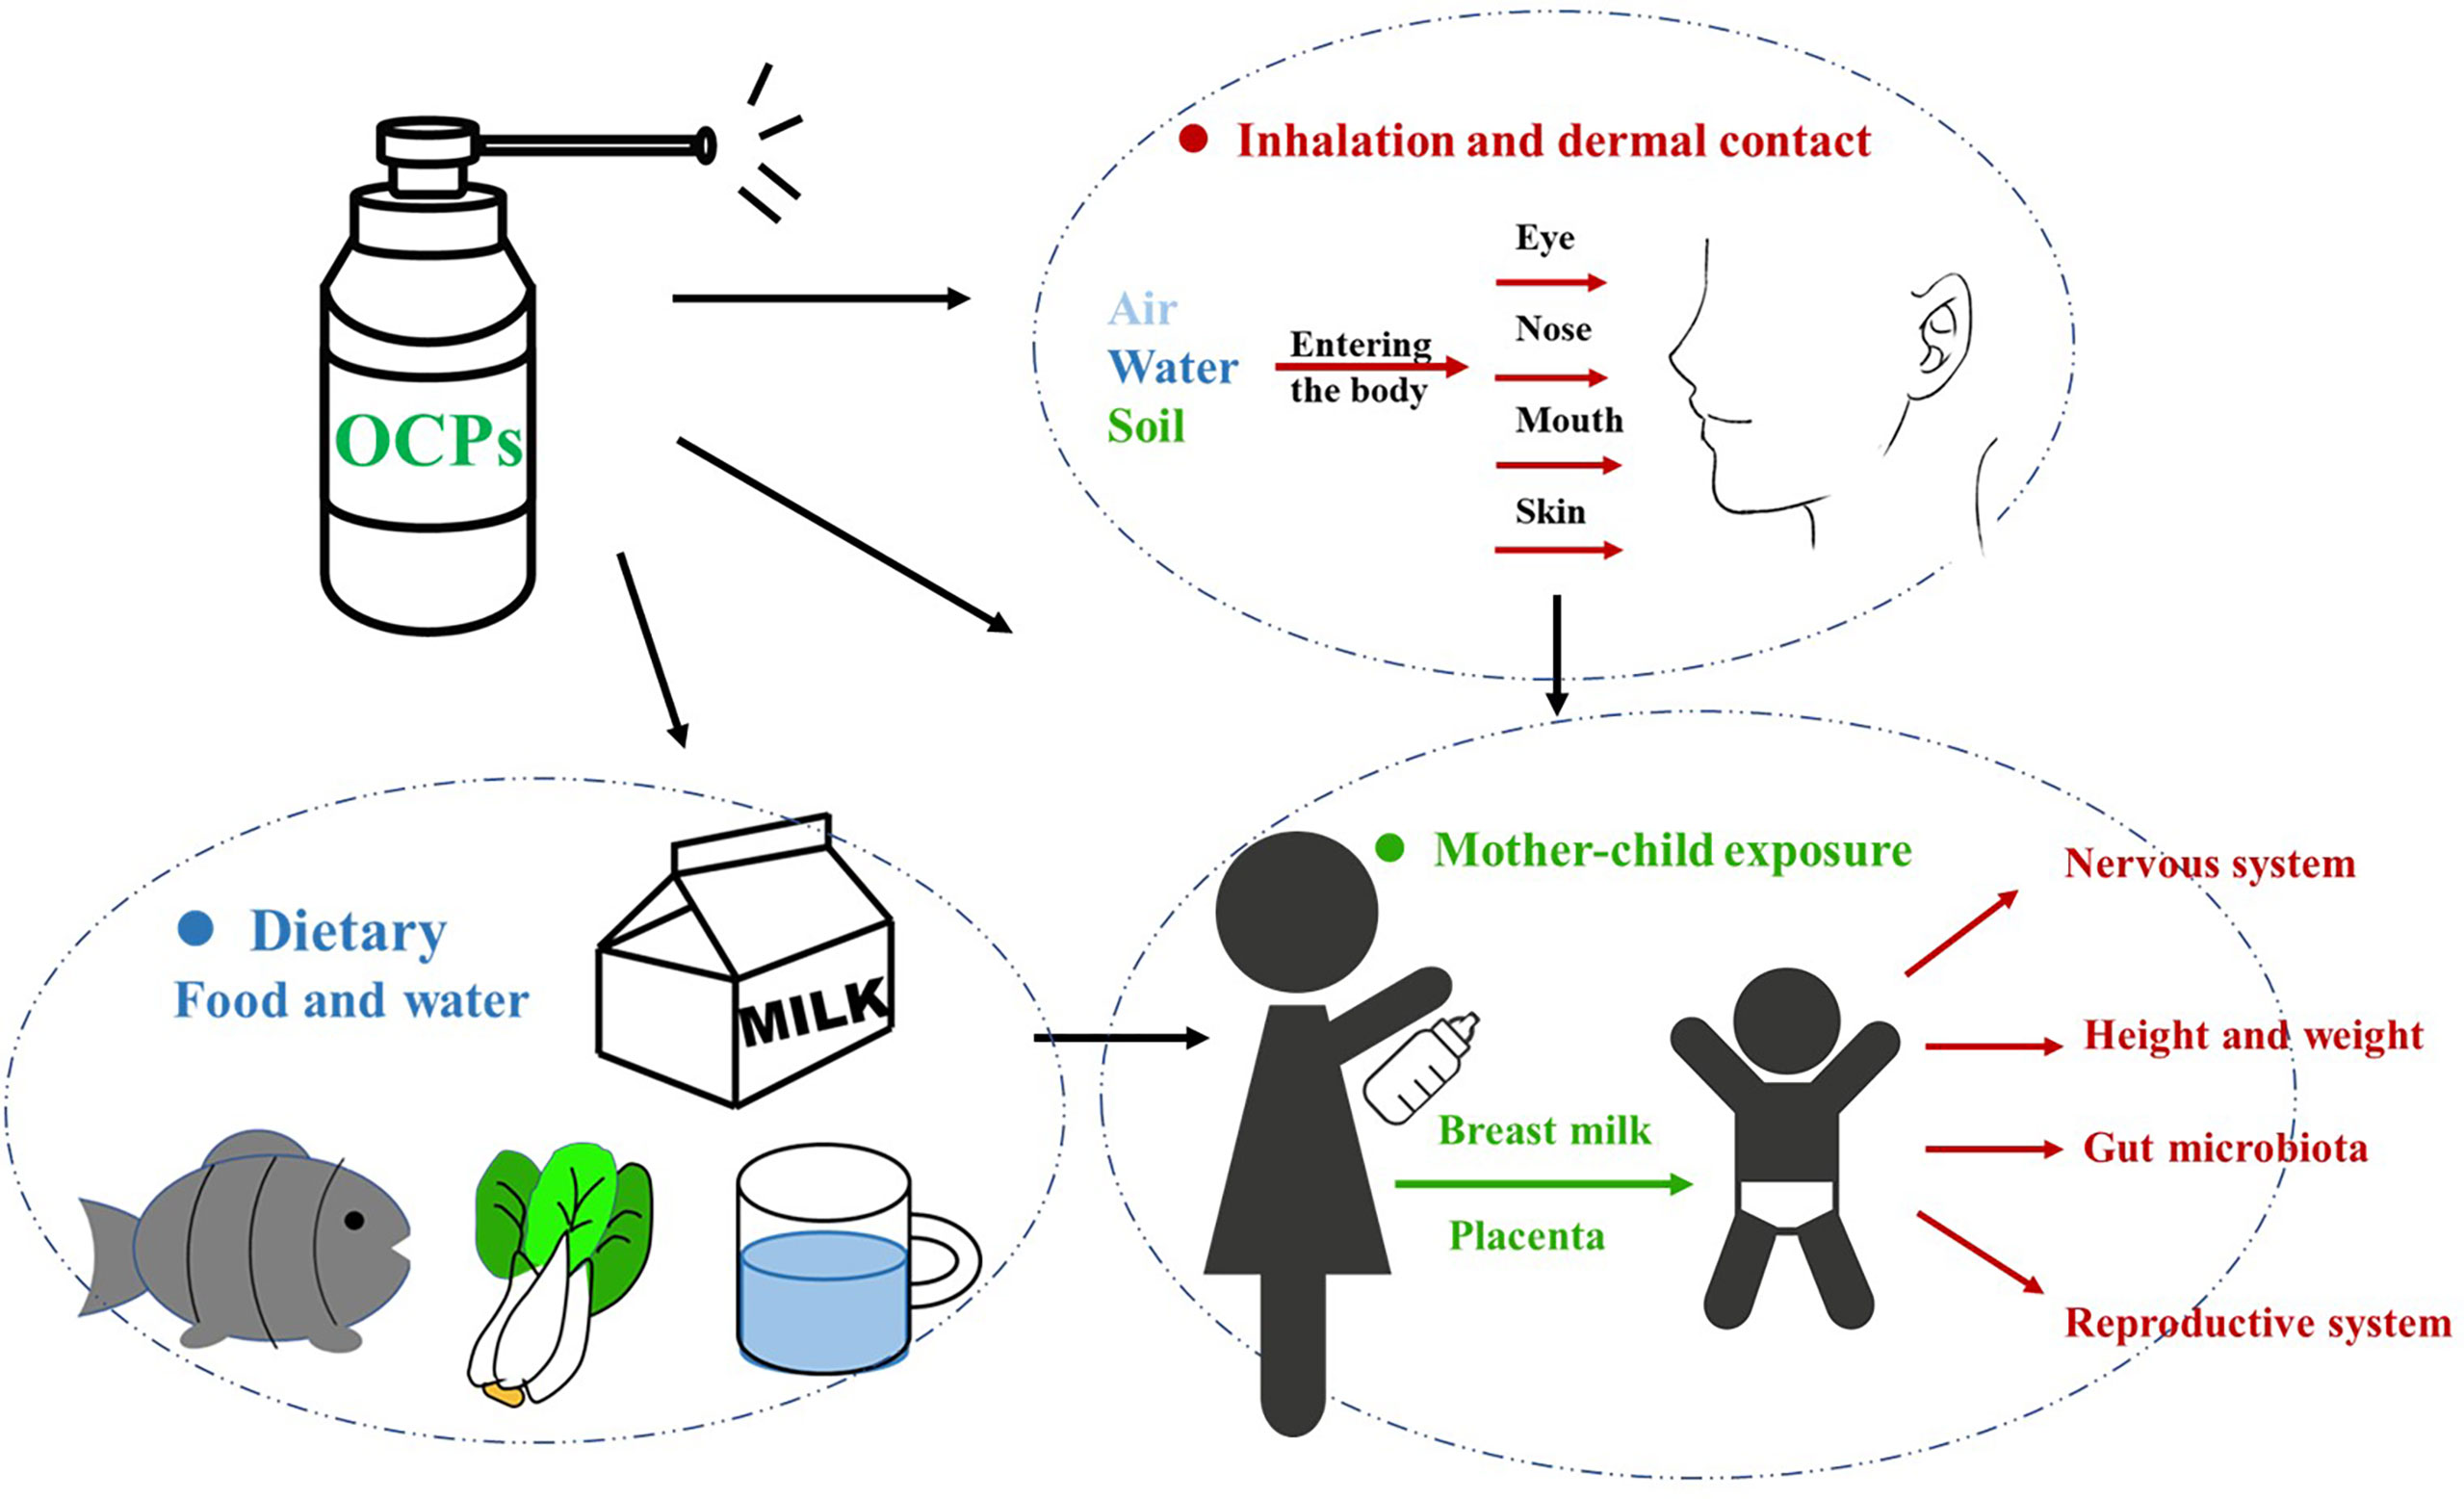 Frontiers Effects of Organochlorine Pesticide Residues in Maternal Body on Infants